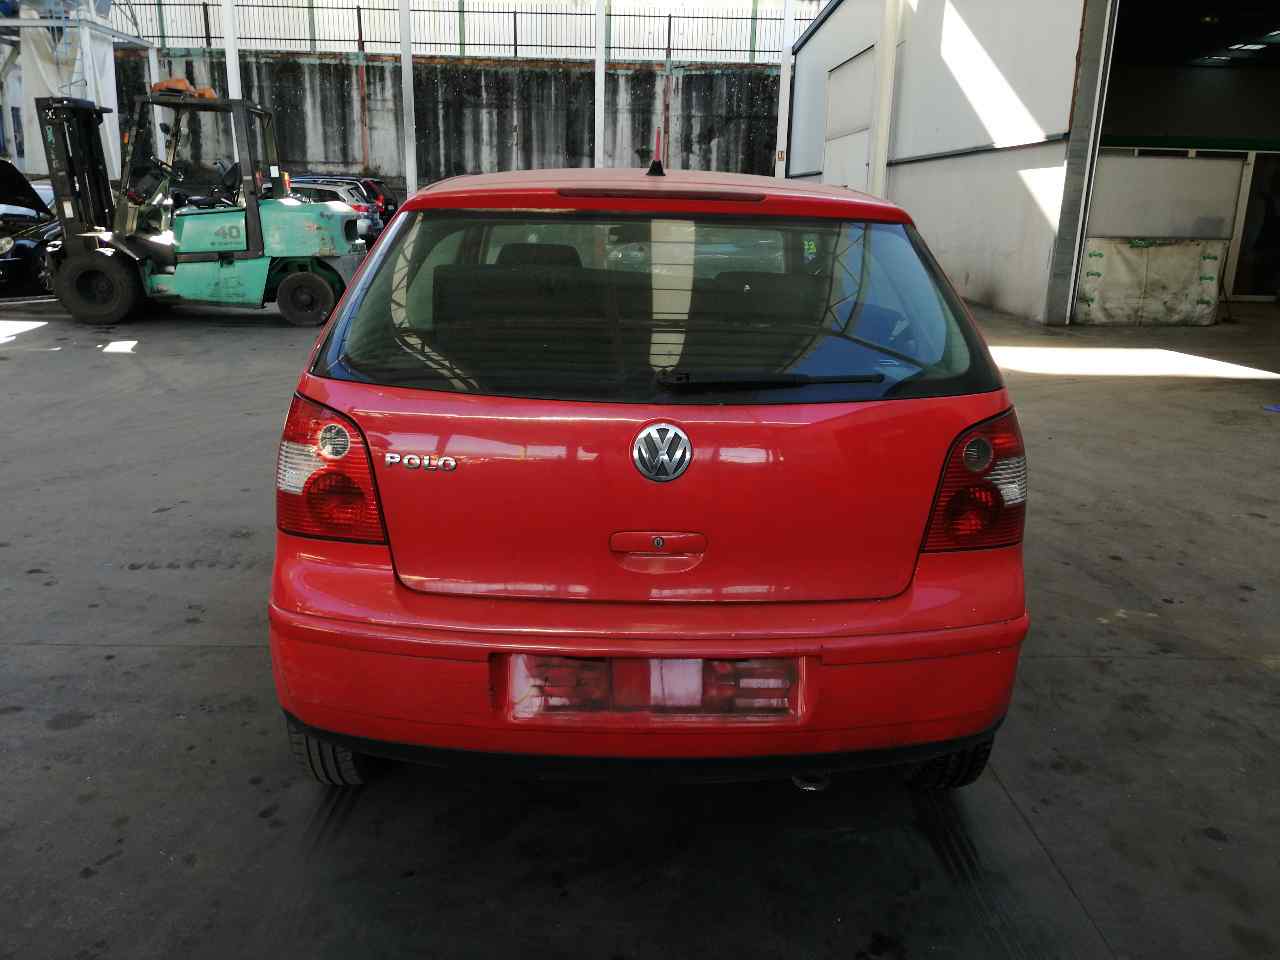 VOLKSWAGEN Polo 4 generation (2001-2009) Rear Right Taillight Lamp 6Q6945112A, 6Q6945258A, 3PUERTAS 19897301